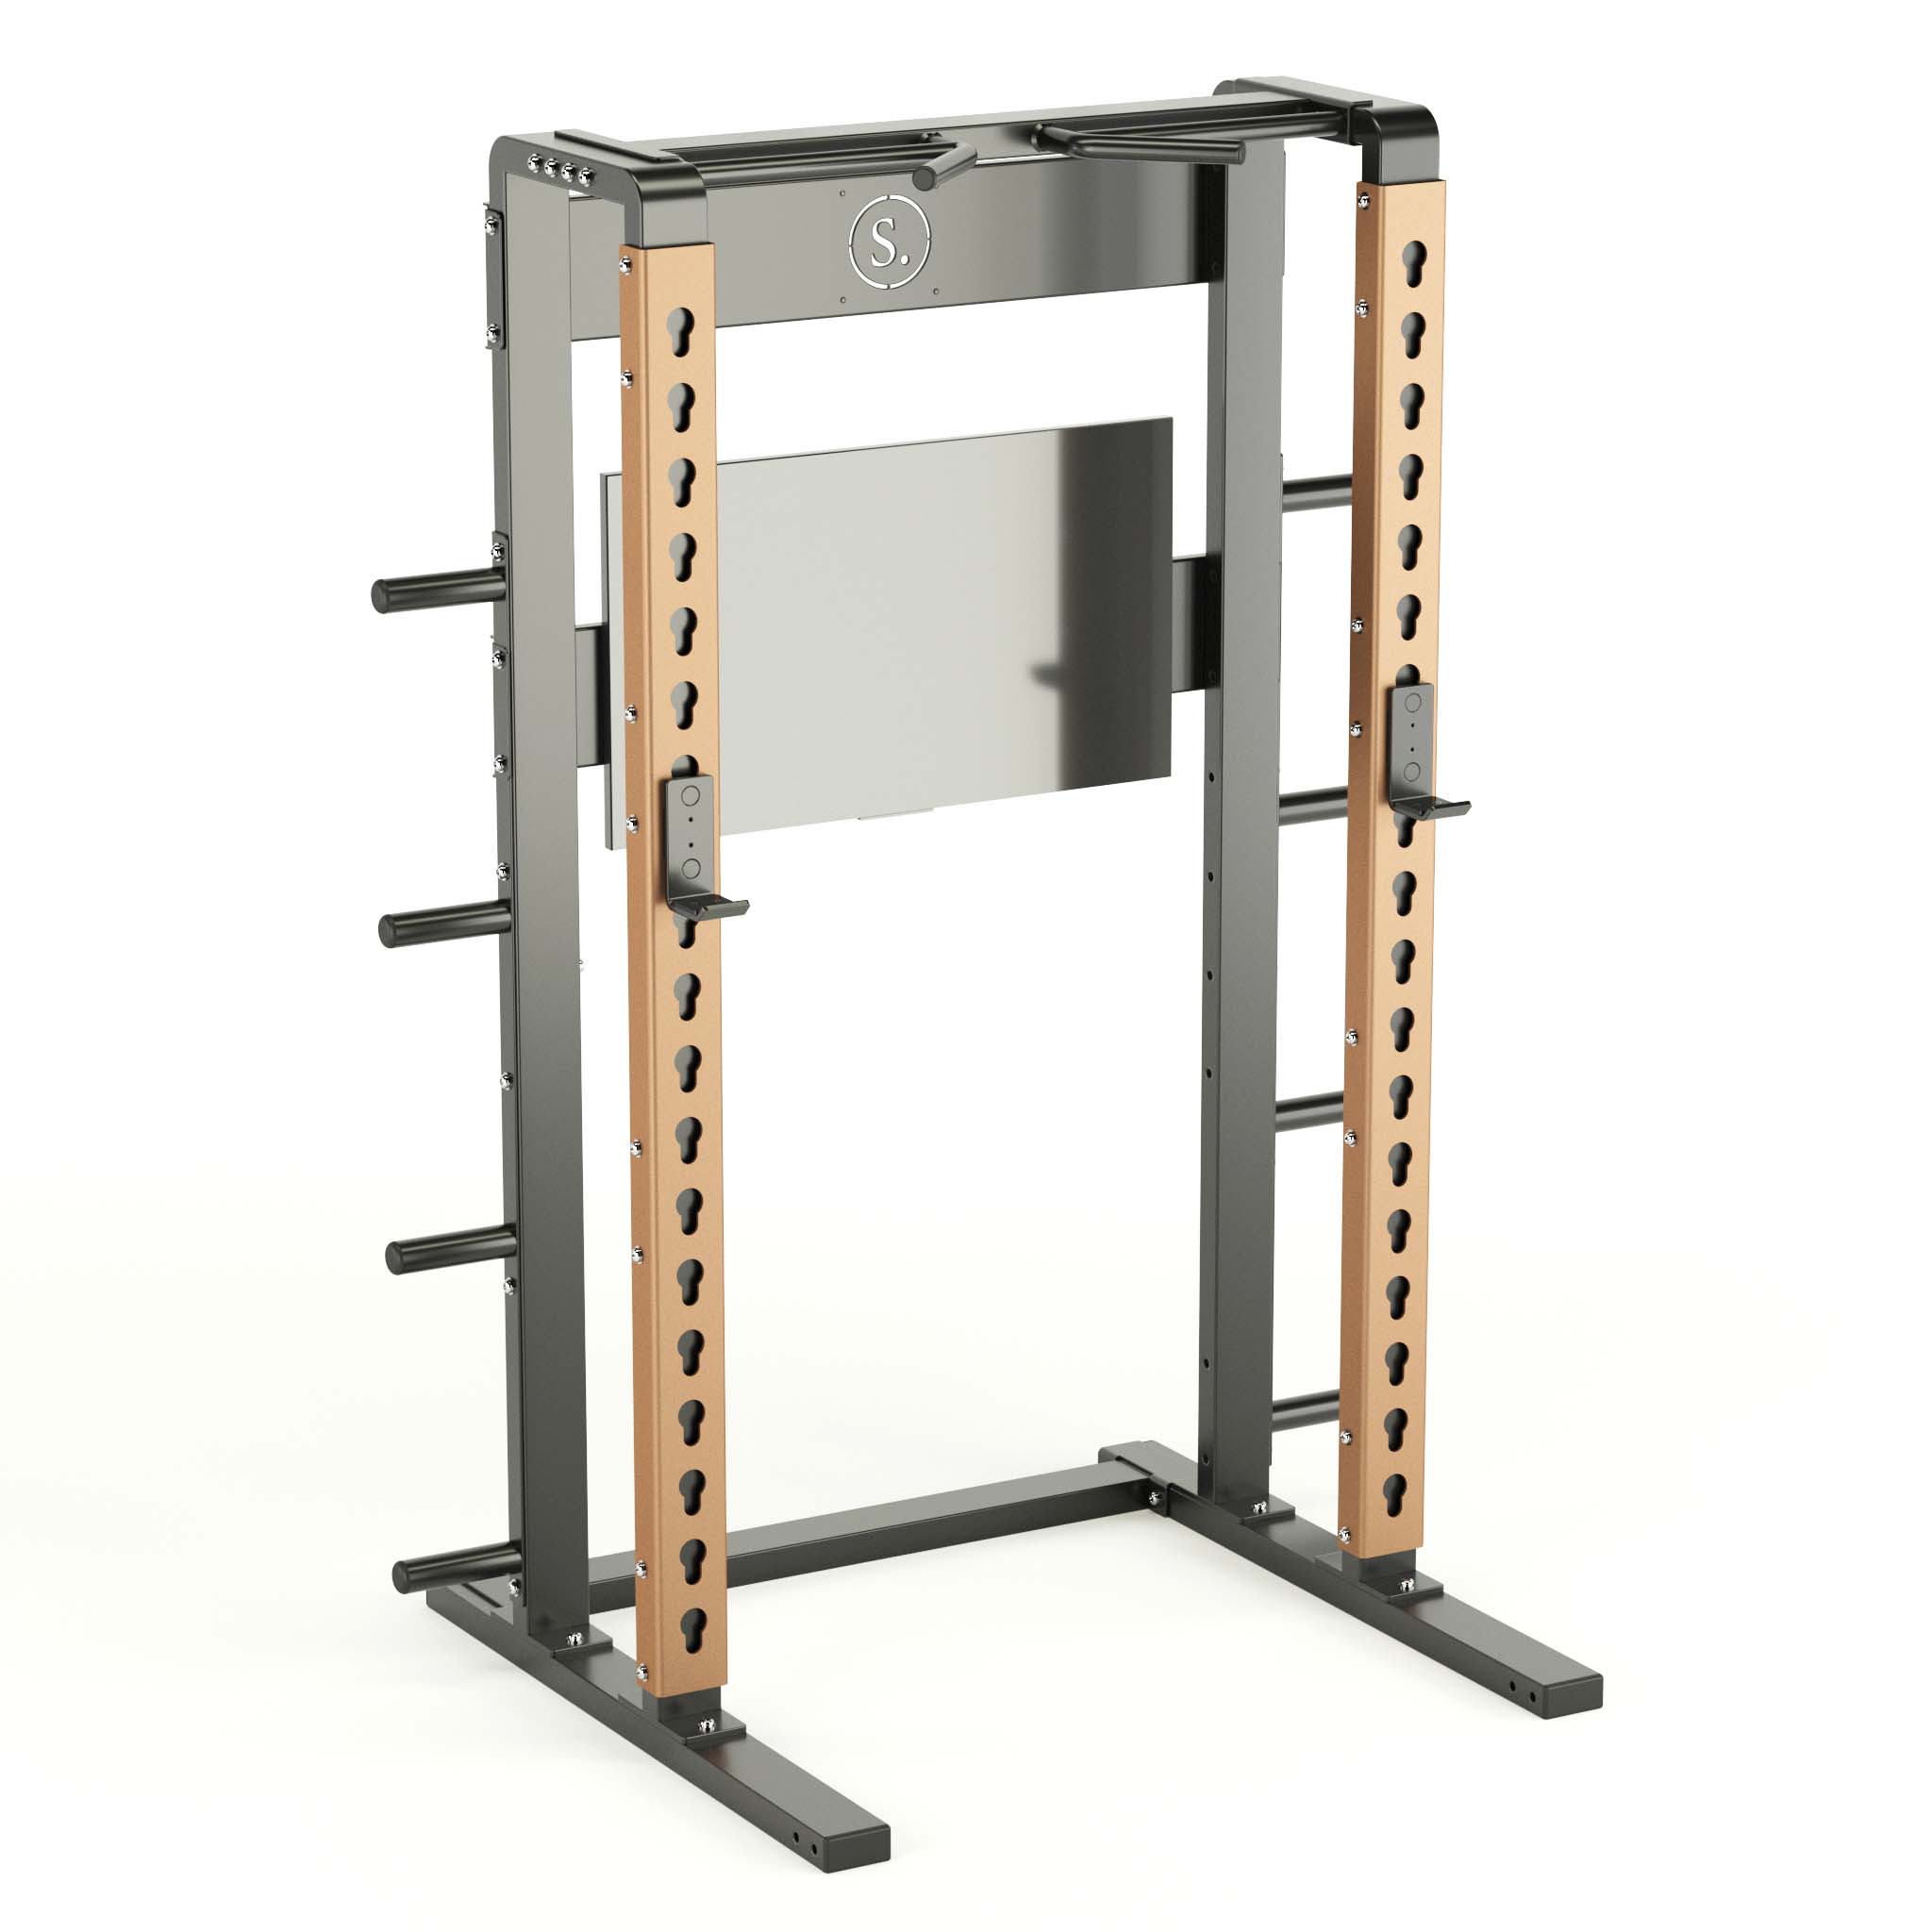 Solo Squat Rack Plus with weight horns in bronze